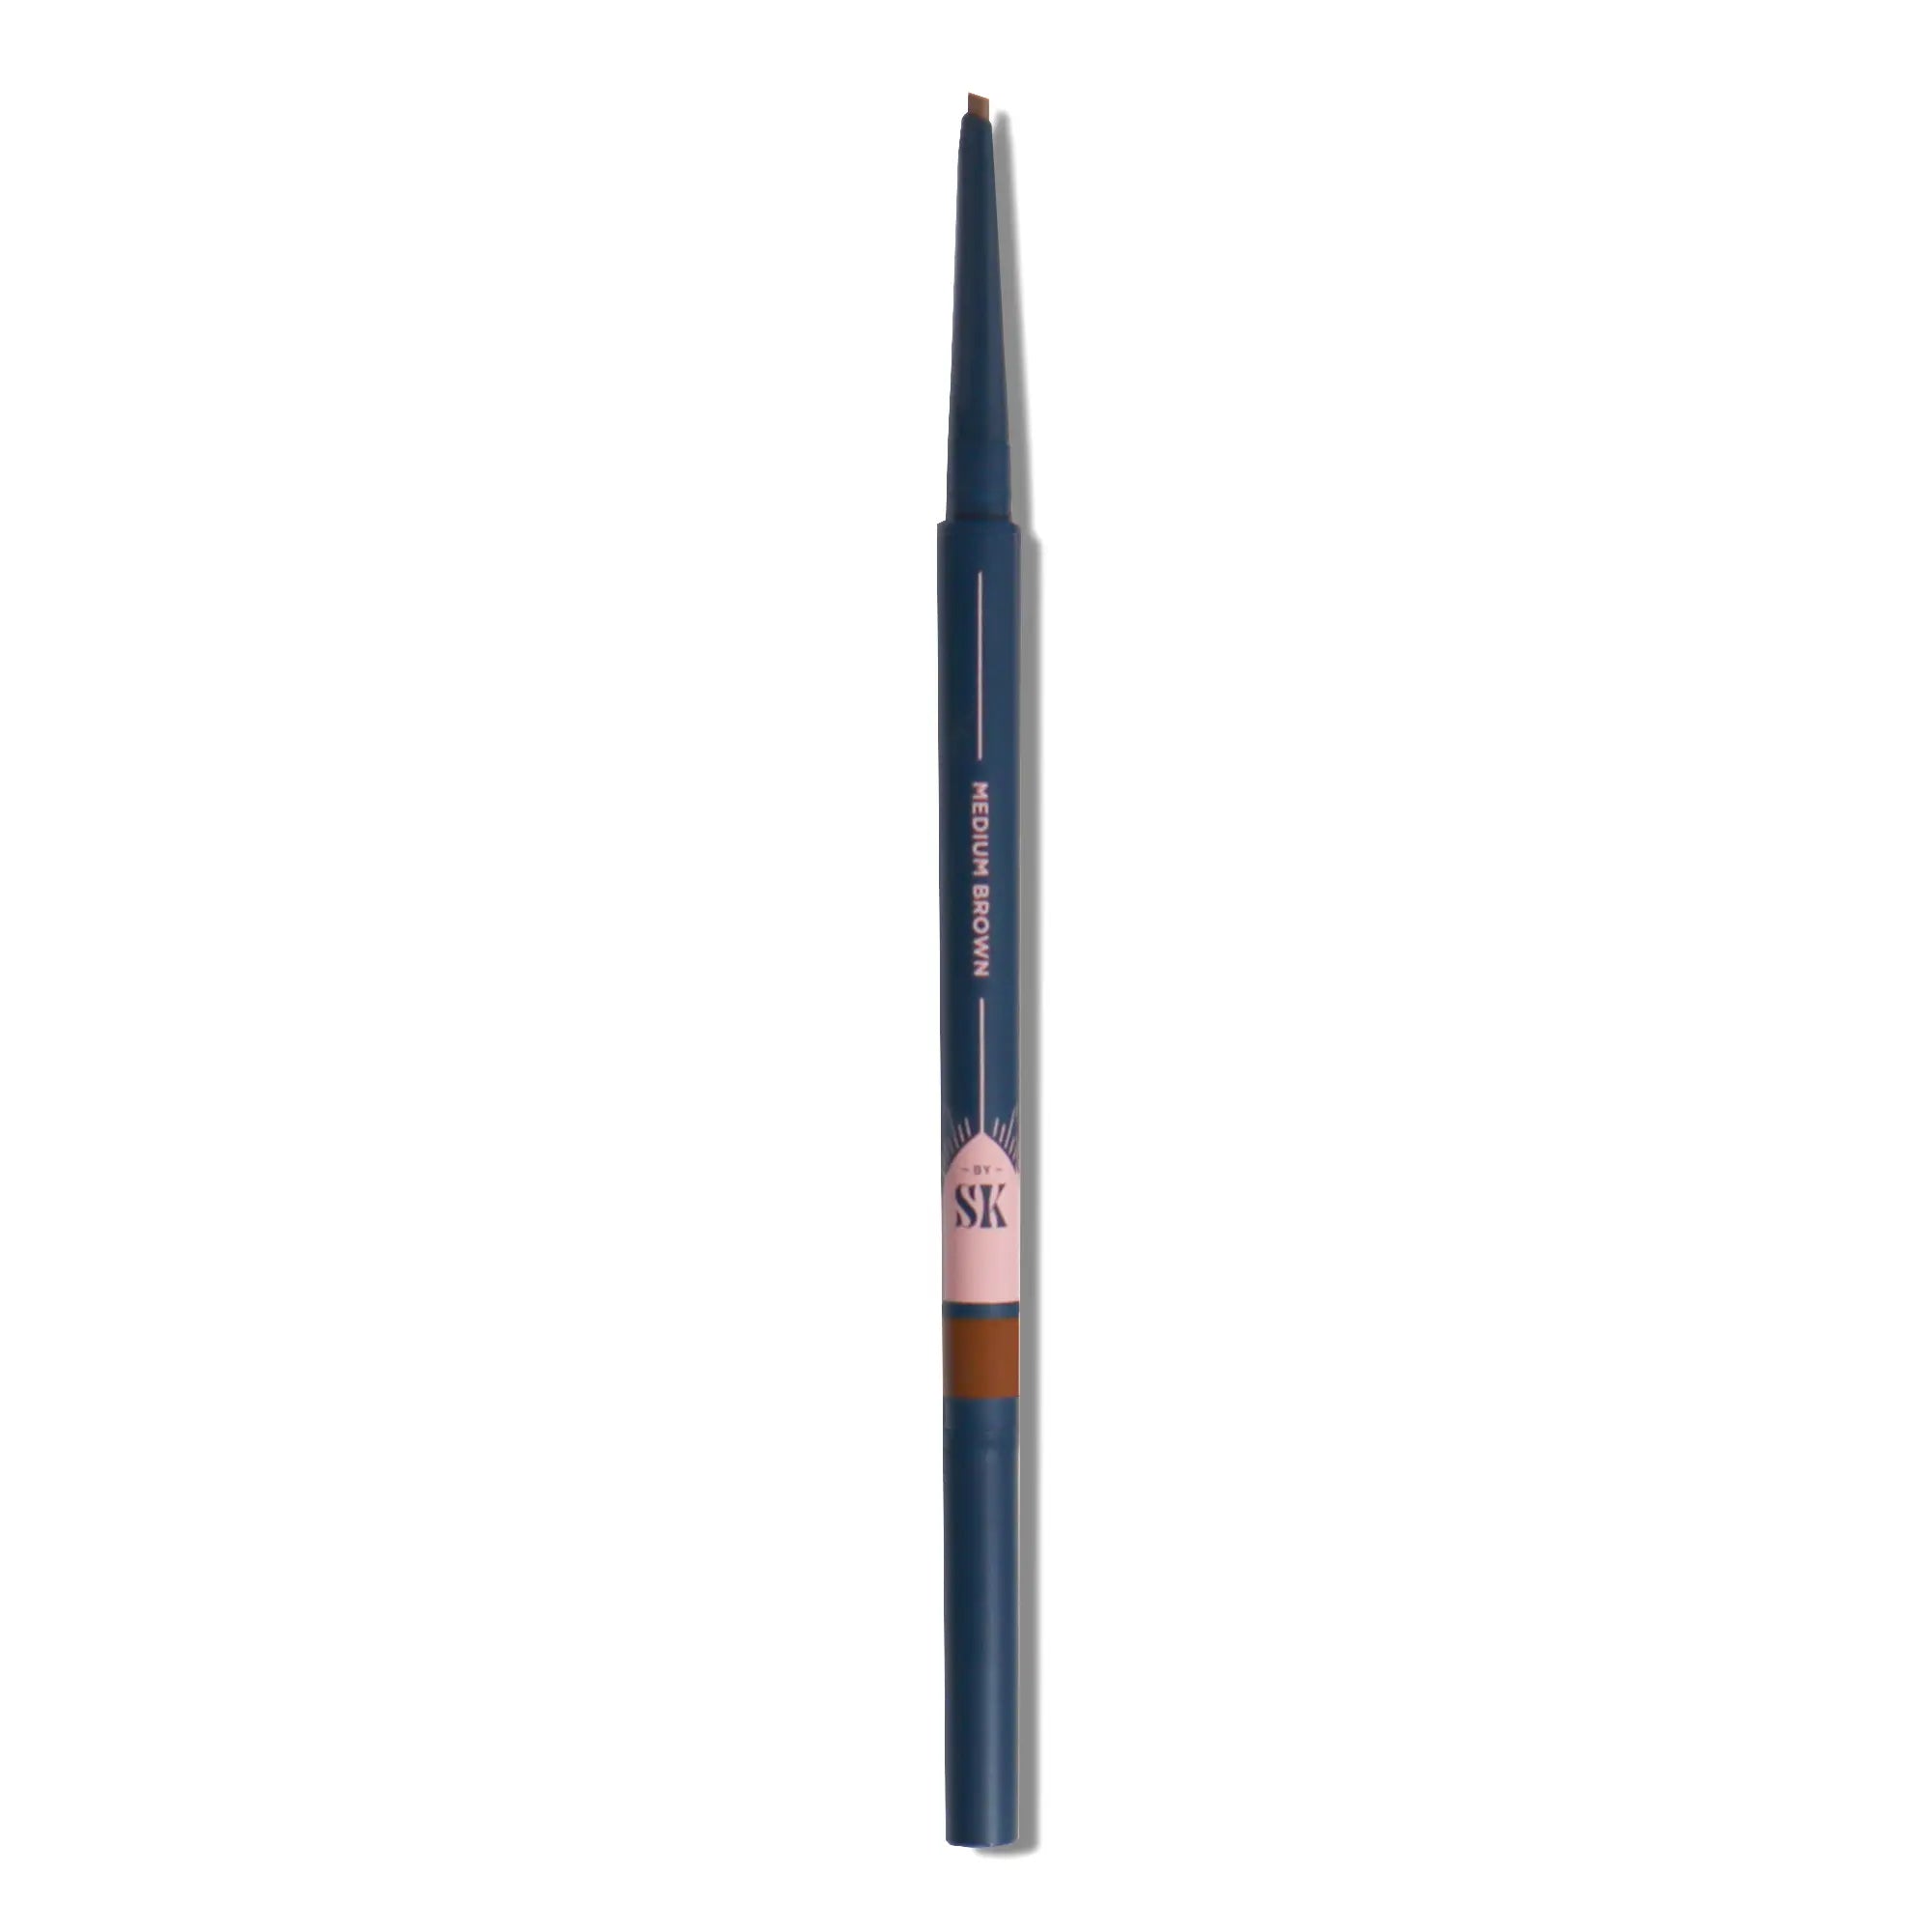 Brow Pencil - Medium Brown 'Can't Do Without You'